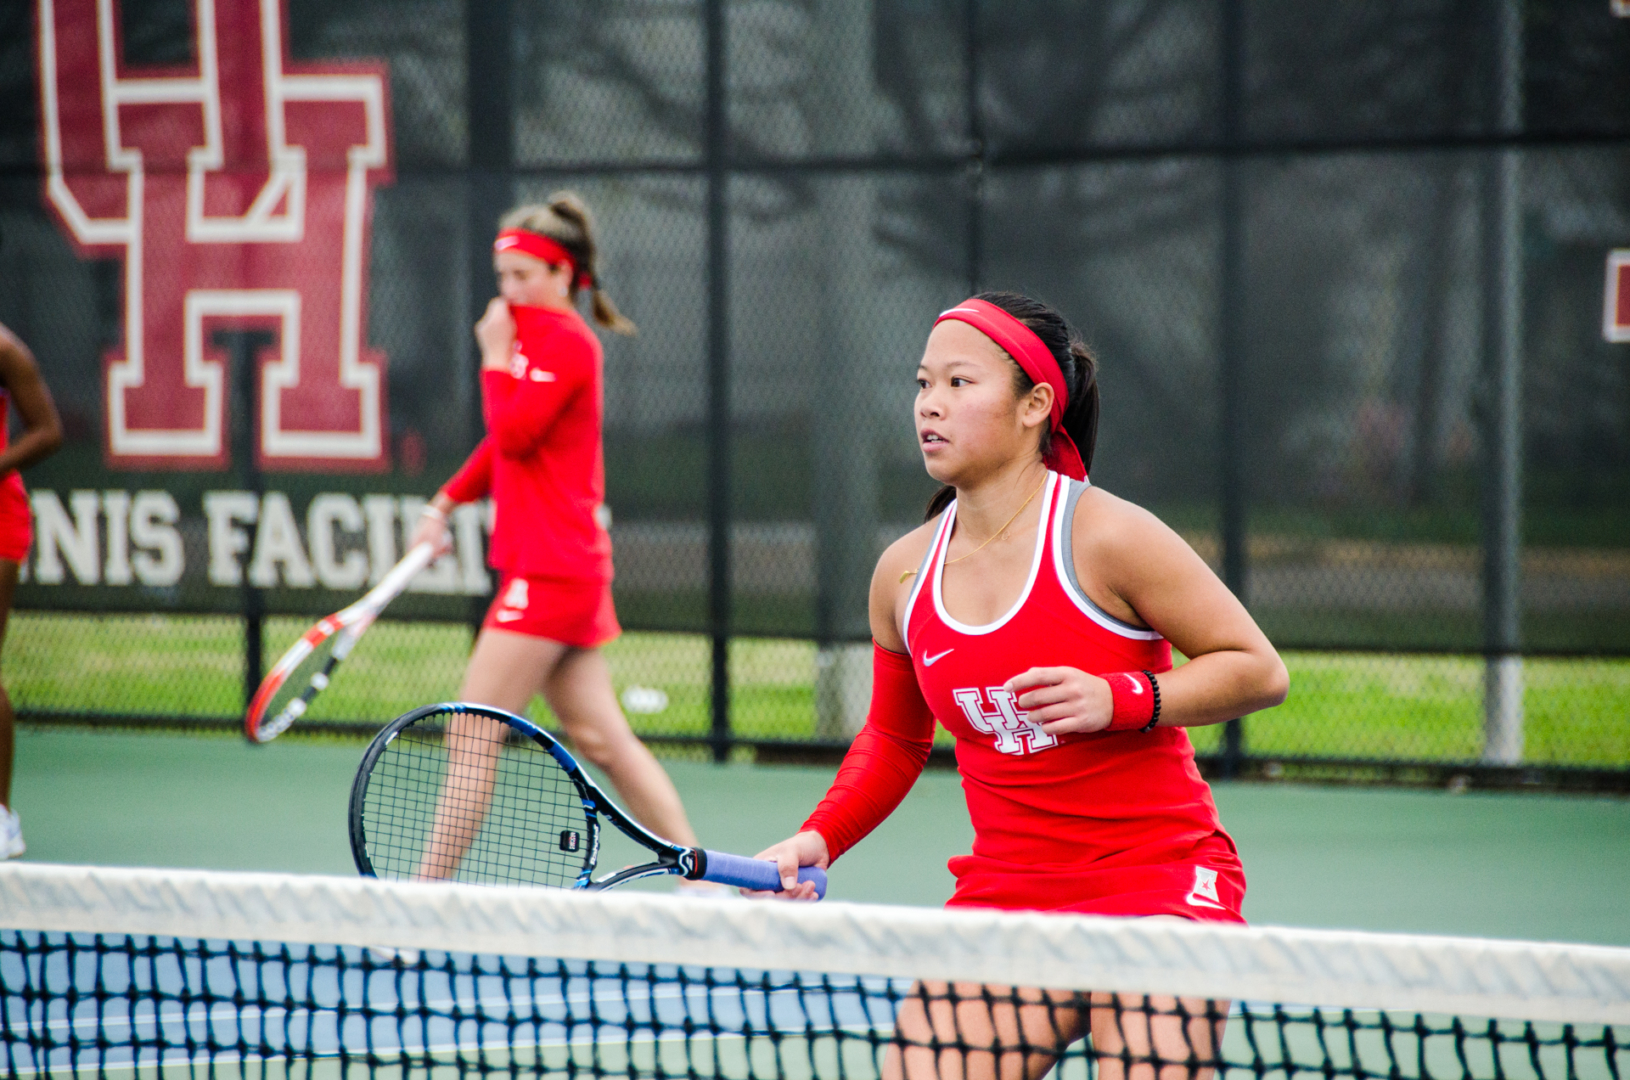 UH tennis senior Phonexay Chitdara (right) was a part of the duo that defeated Texas A&M and its ranked duo in a match on Monday. | Lino Sandil/The Cougar